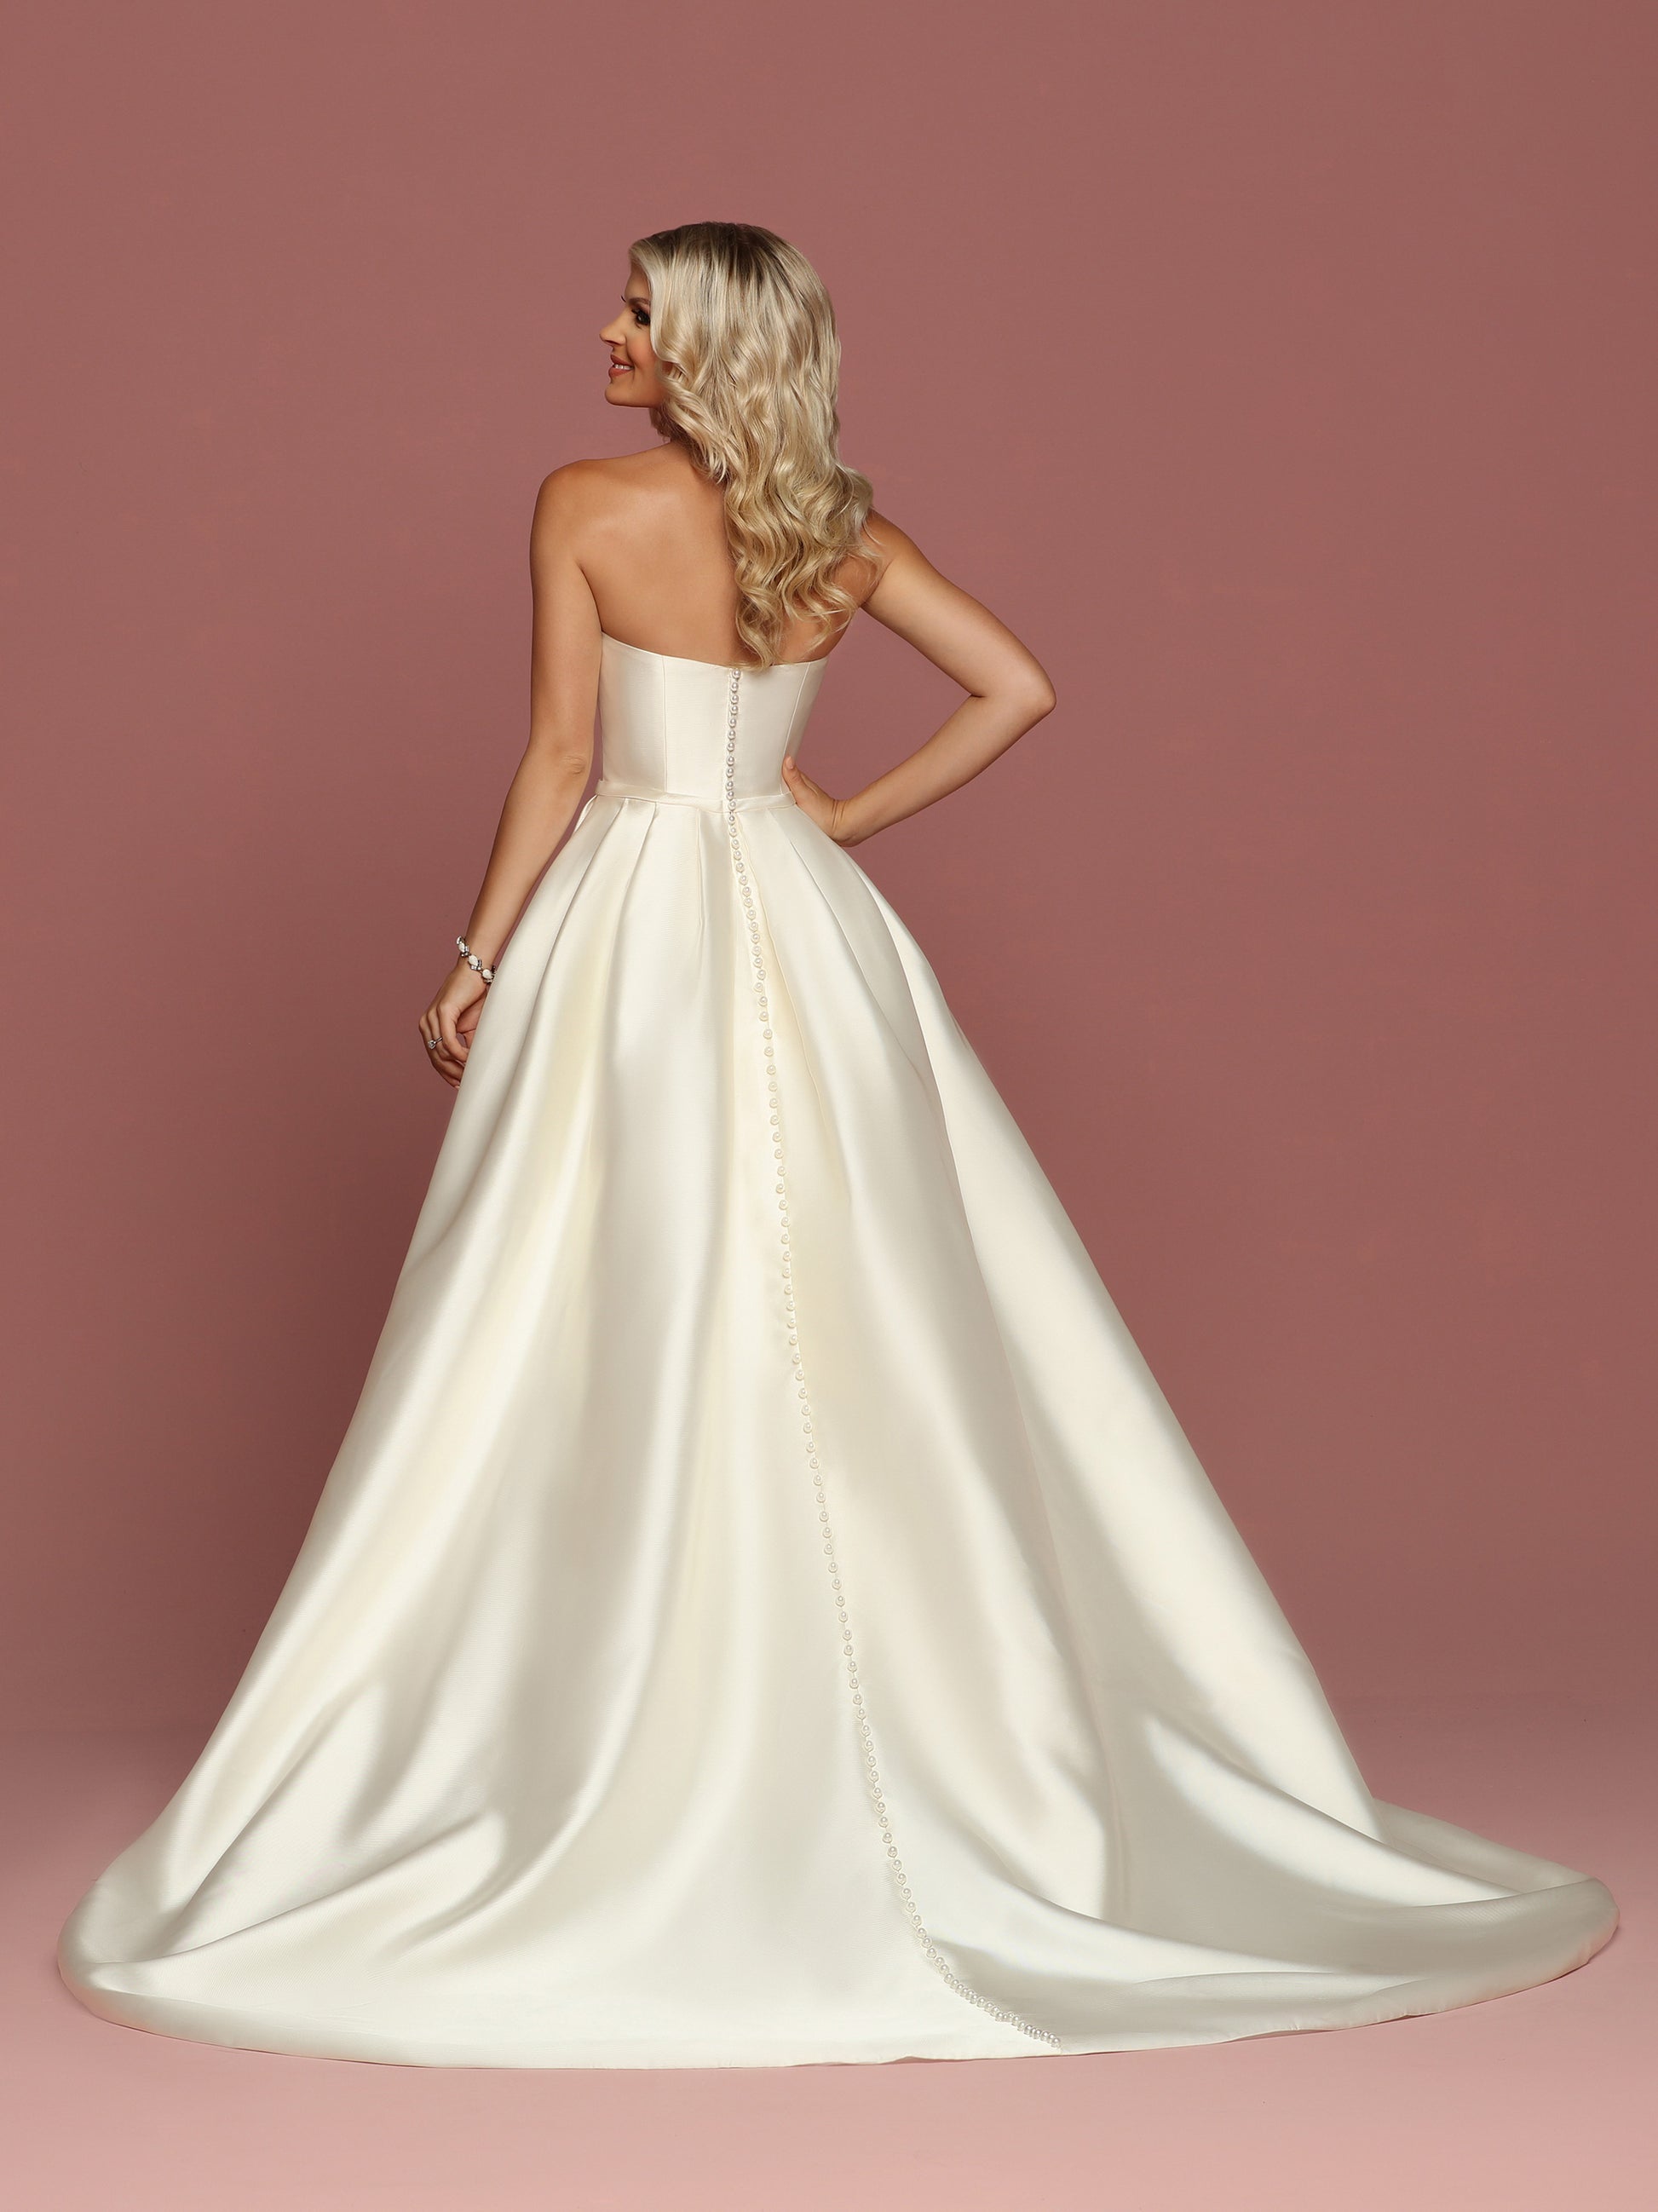 Davinci Bridal 50494 is a gorgeous Mikado Wedding Dress. Strapless Sweetheart neckline with a simple waist belt with bow. Full Pleated skirt has Pockets! Button line the entire back seam of the gown into the train.  Available for 1-2 Week Delivery!!!  Available Sizes: 2,4,6,8,10,12,14,16,18,20  Available Colors: Ivory